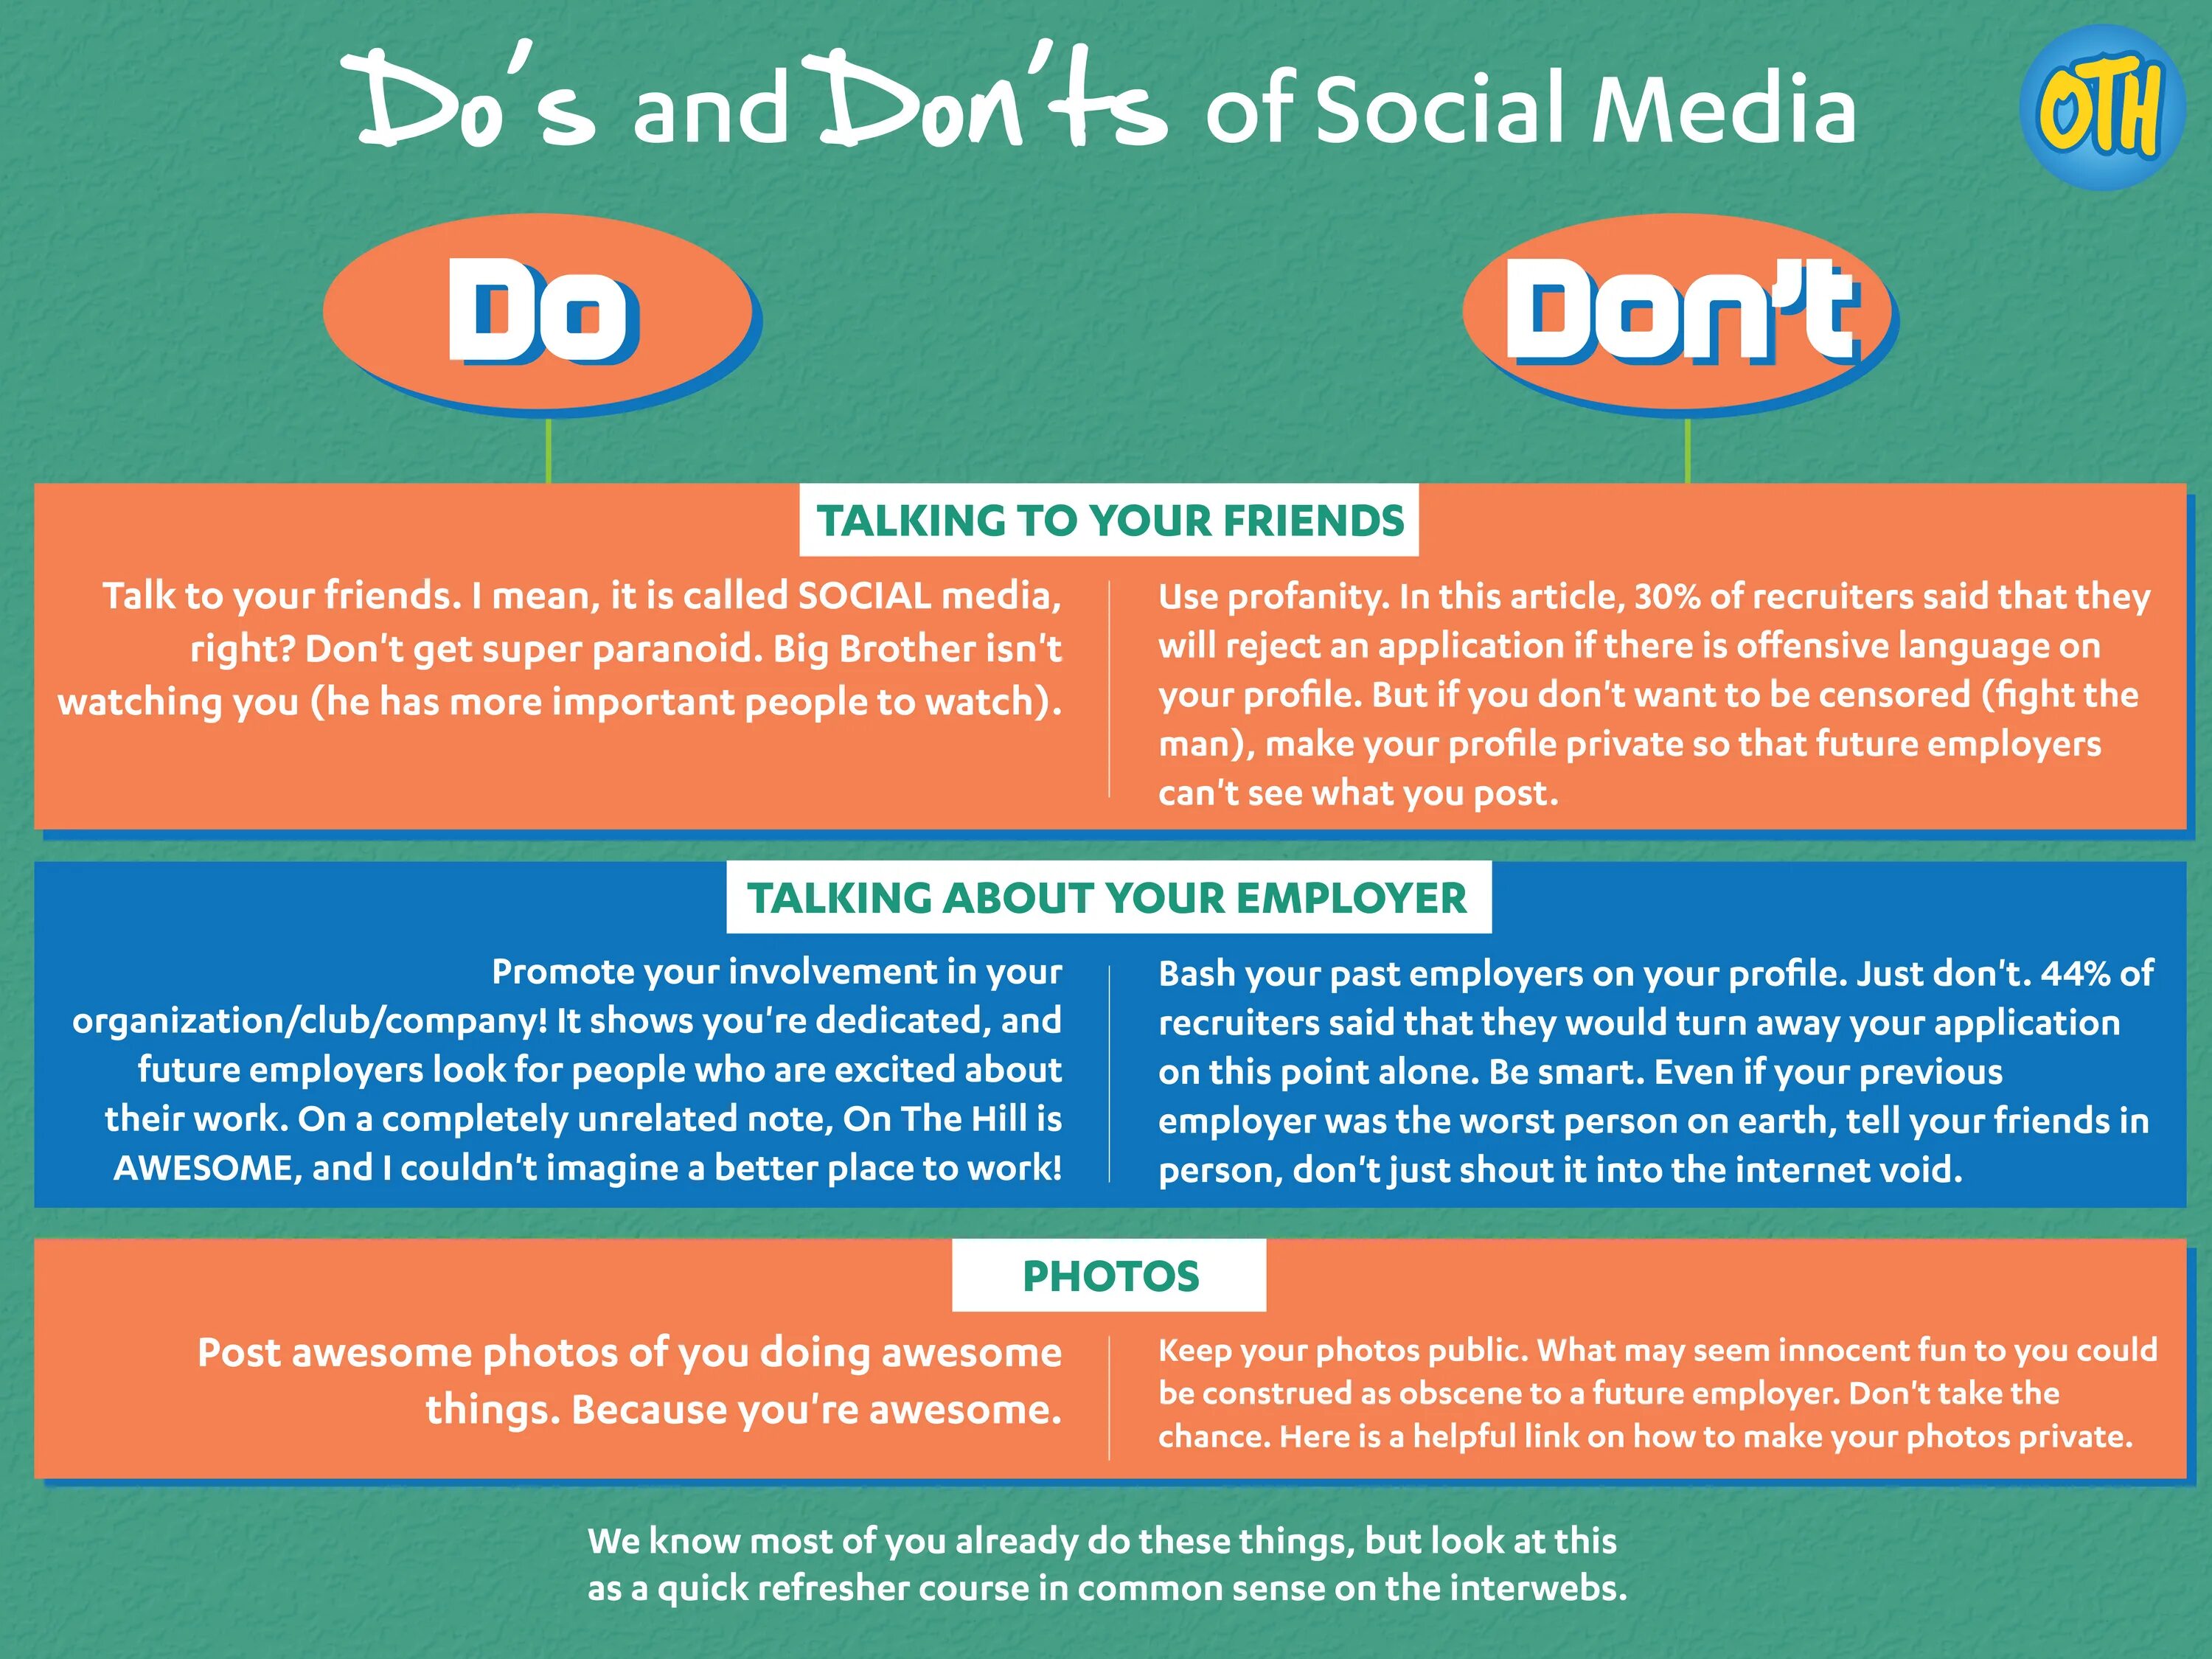 Does and donts. Портфолио make a leaflet of dos and don'TS to tell School students what to do when playing outside. Portfolio make a leaflet of dos and don'TS to tell School 6 класс. Учебник dos and don'TS. Portfolio make a leaflet of dos and don'TS to tell School students what to do when playing outside с переводом.